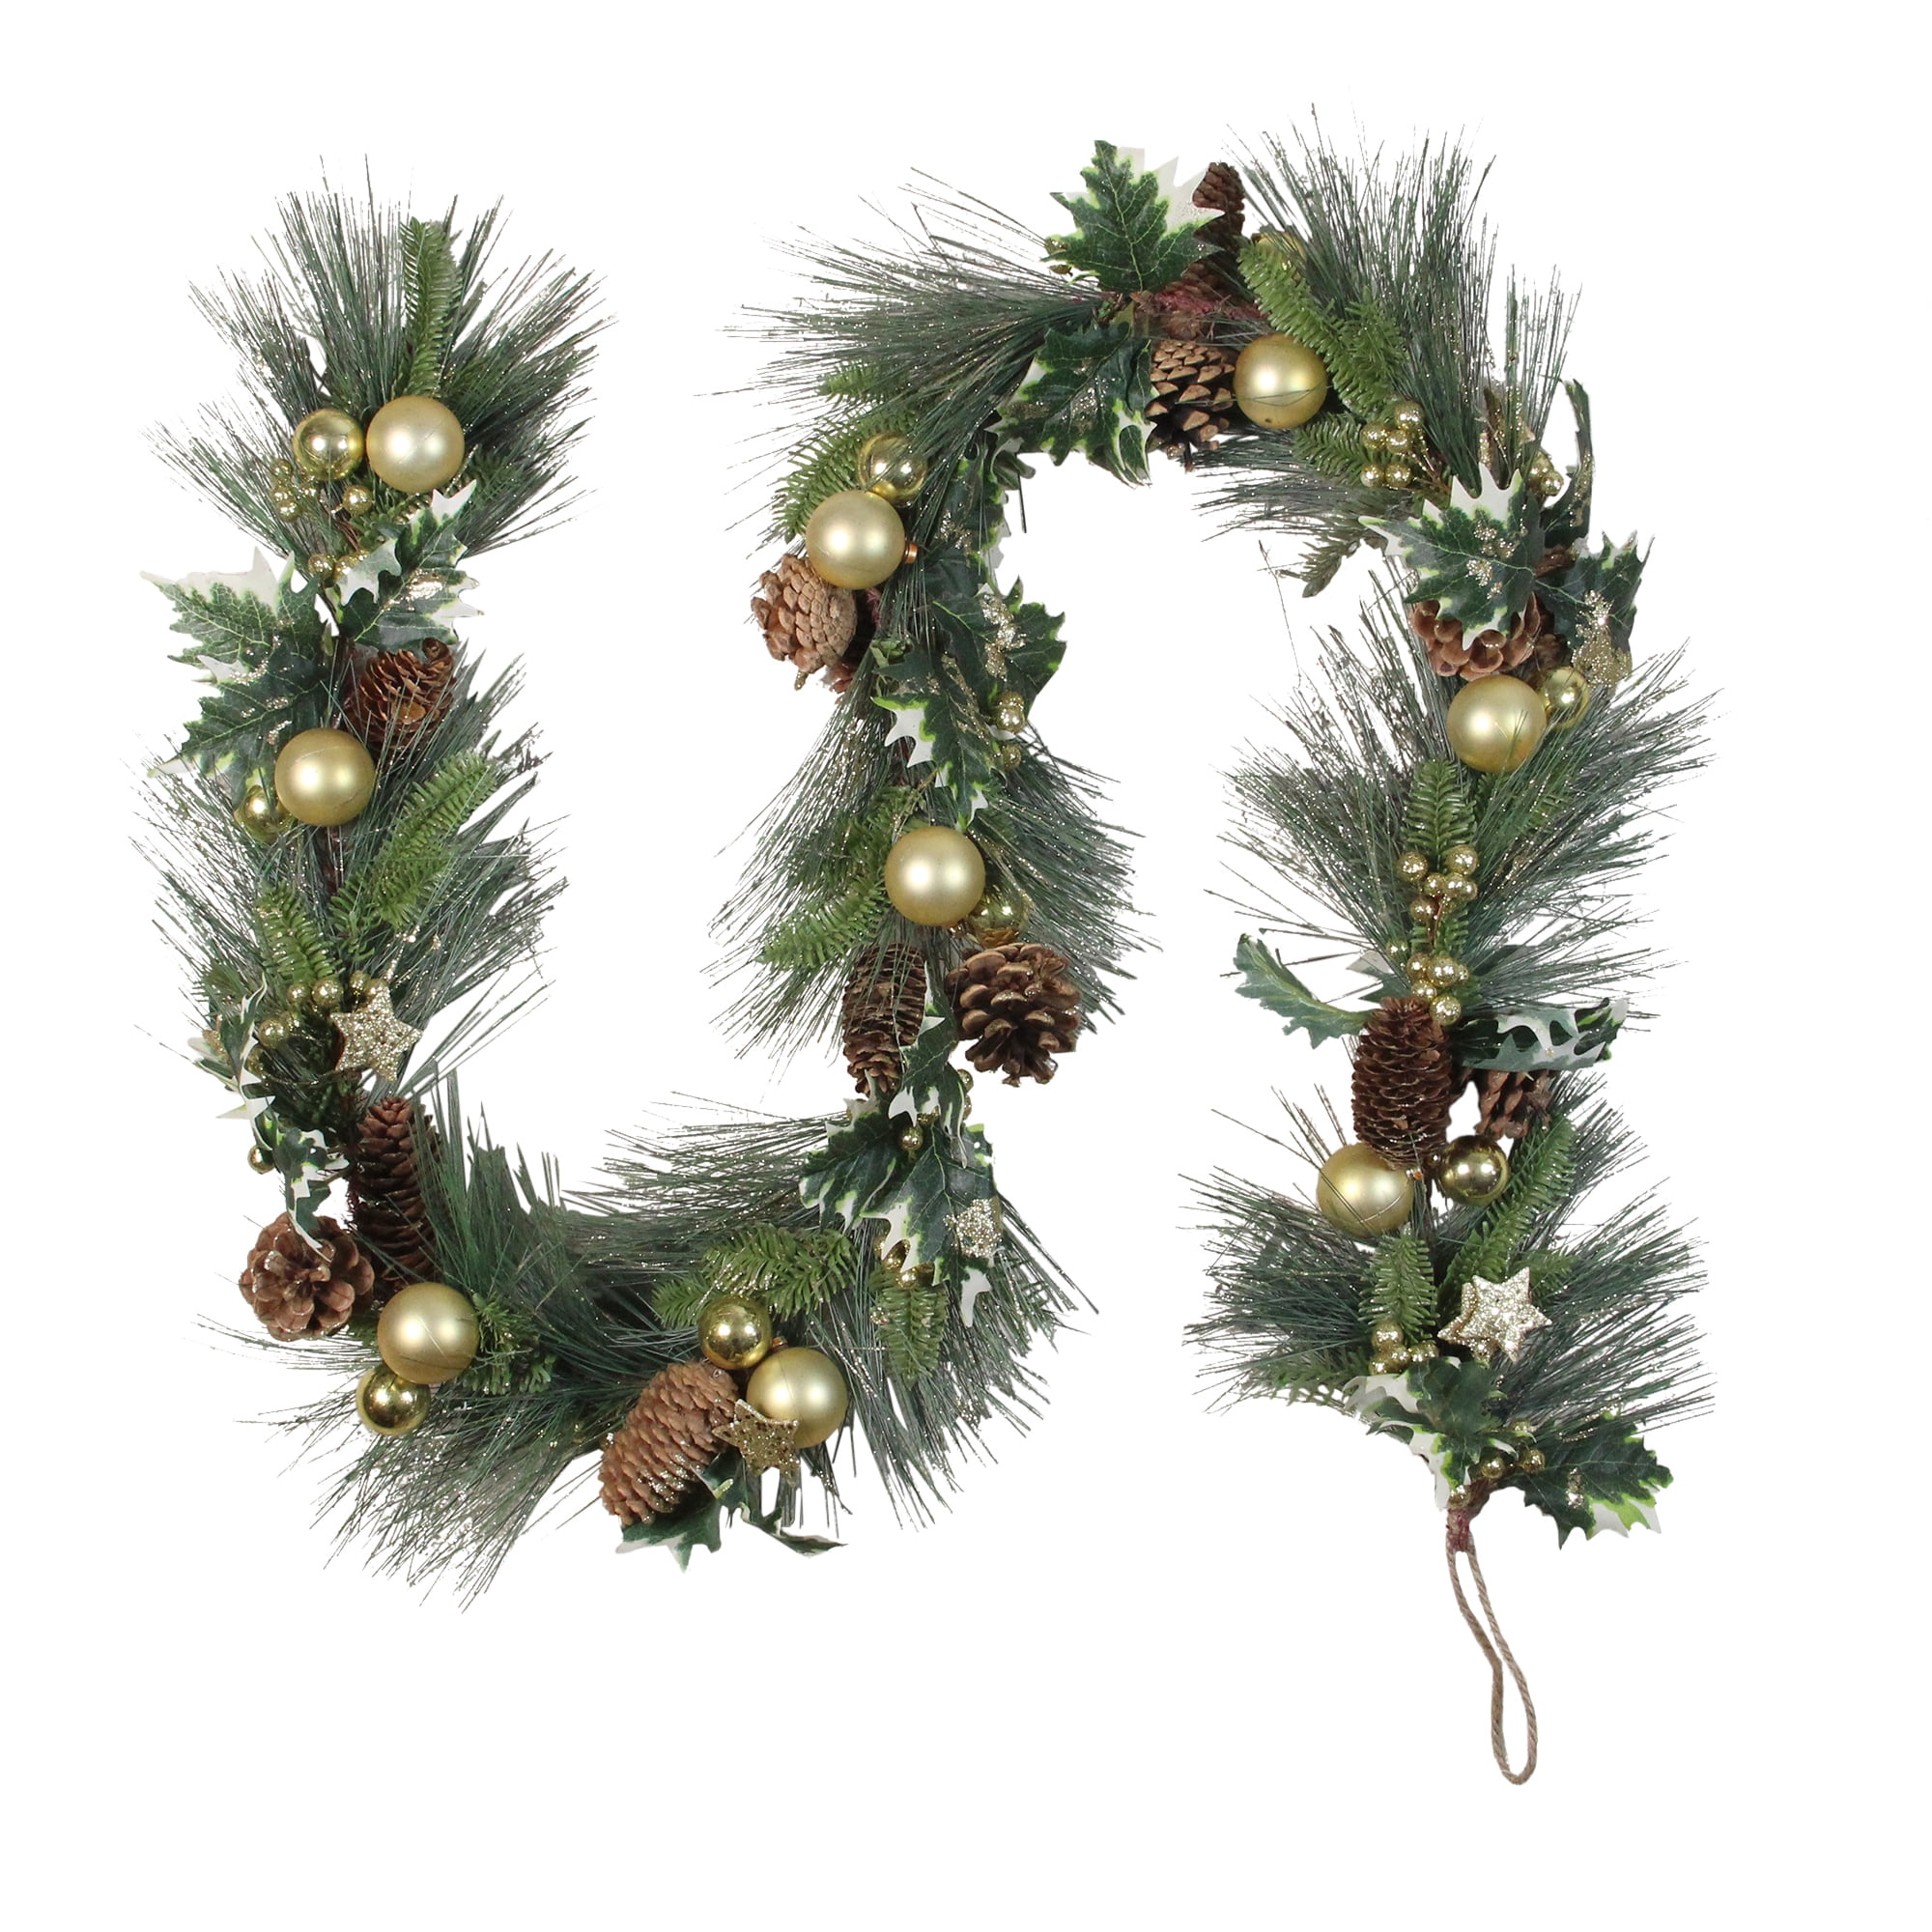 NEW Holiday Style 24 Feet Green Pine Garland Indoor Outdoor Use “Let it Snow” 